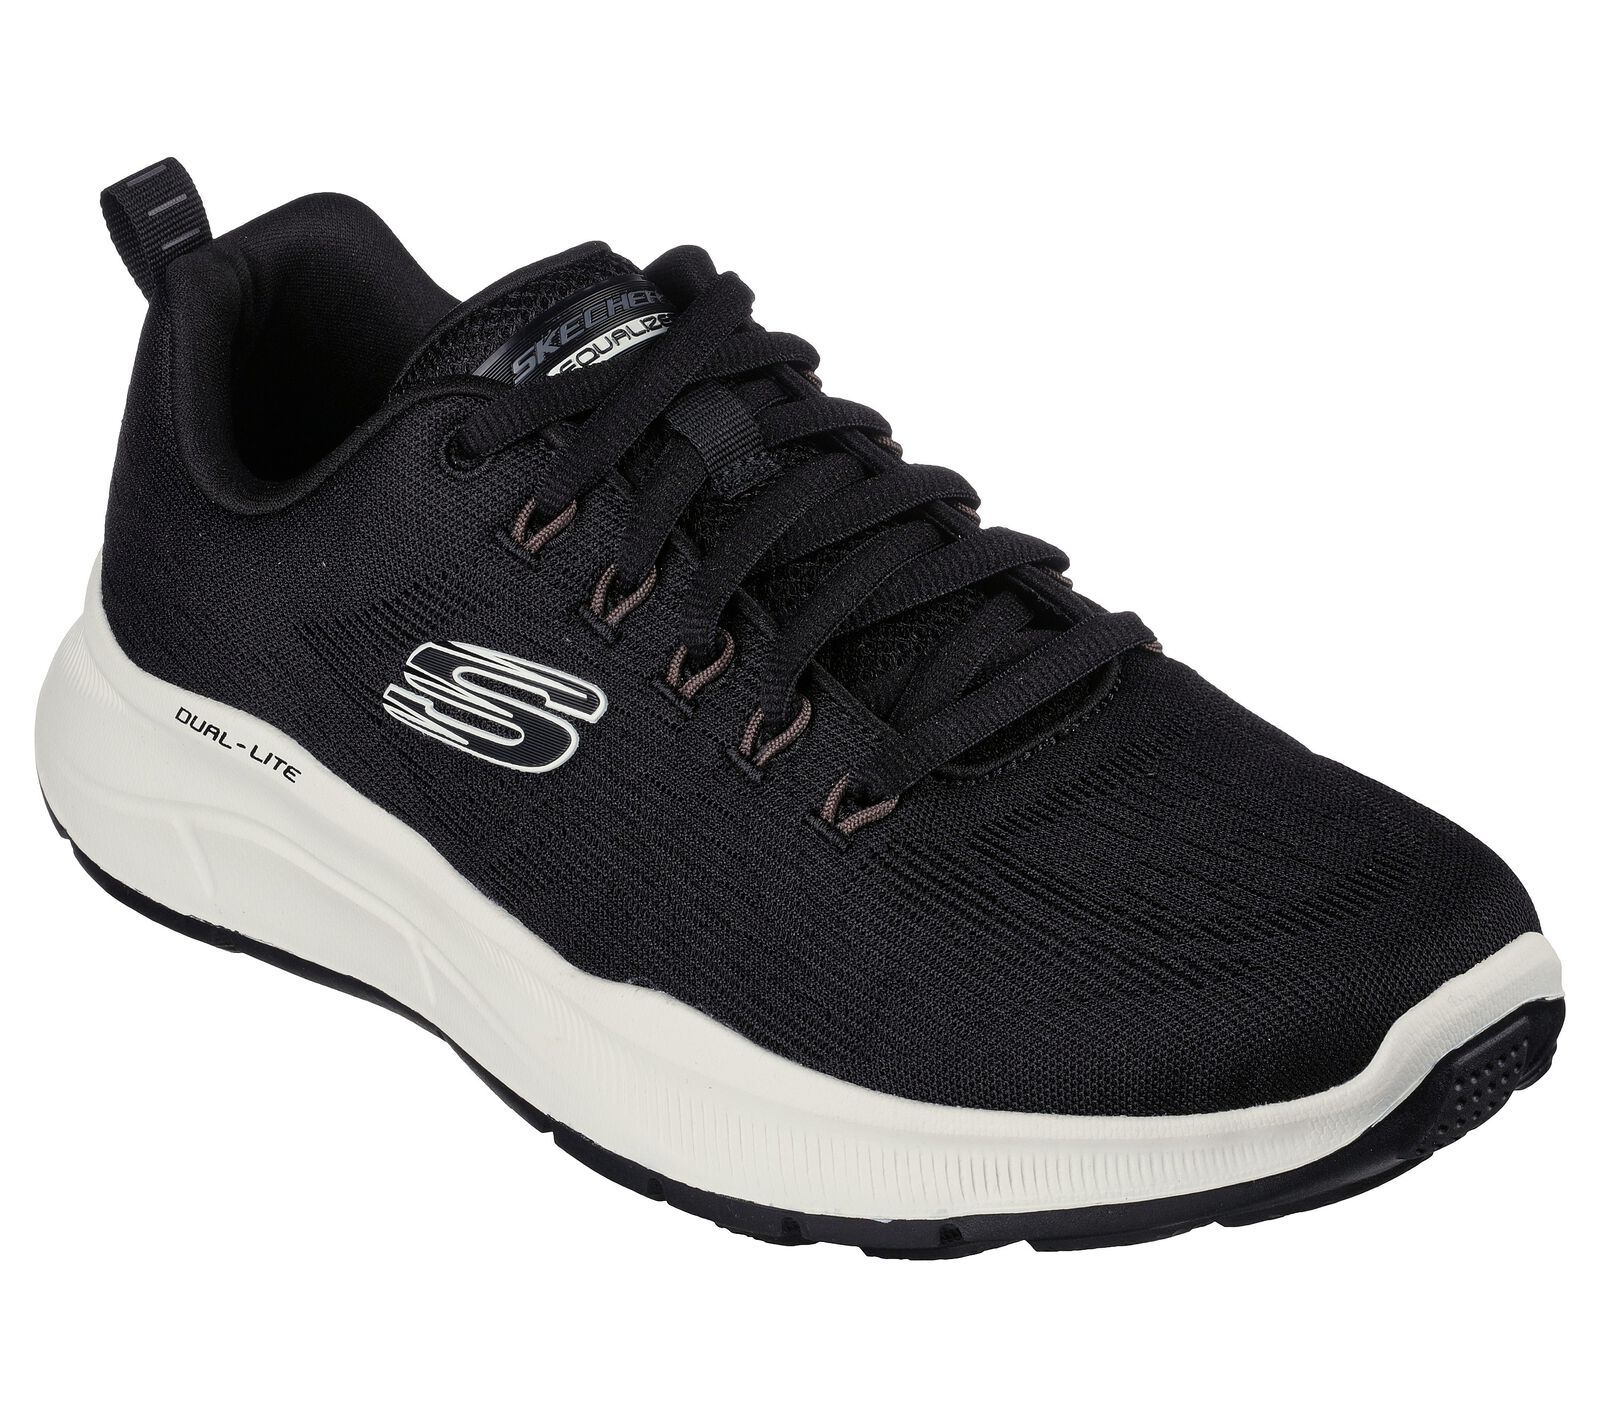 Skechers 232519 Relaxed Fit Equalizer 5.0 Mens Black & White Textile Vegan Lace Up Trainers